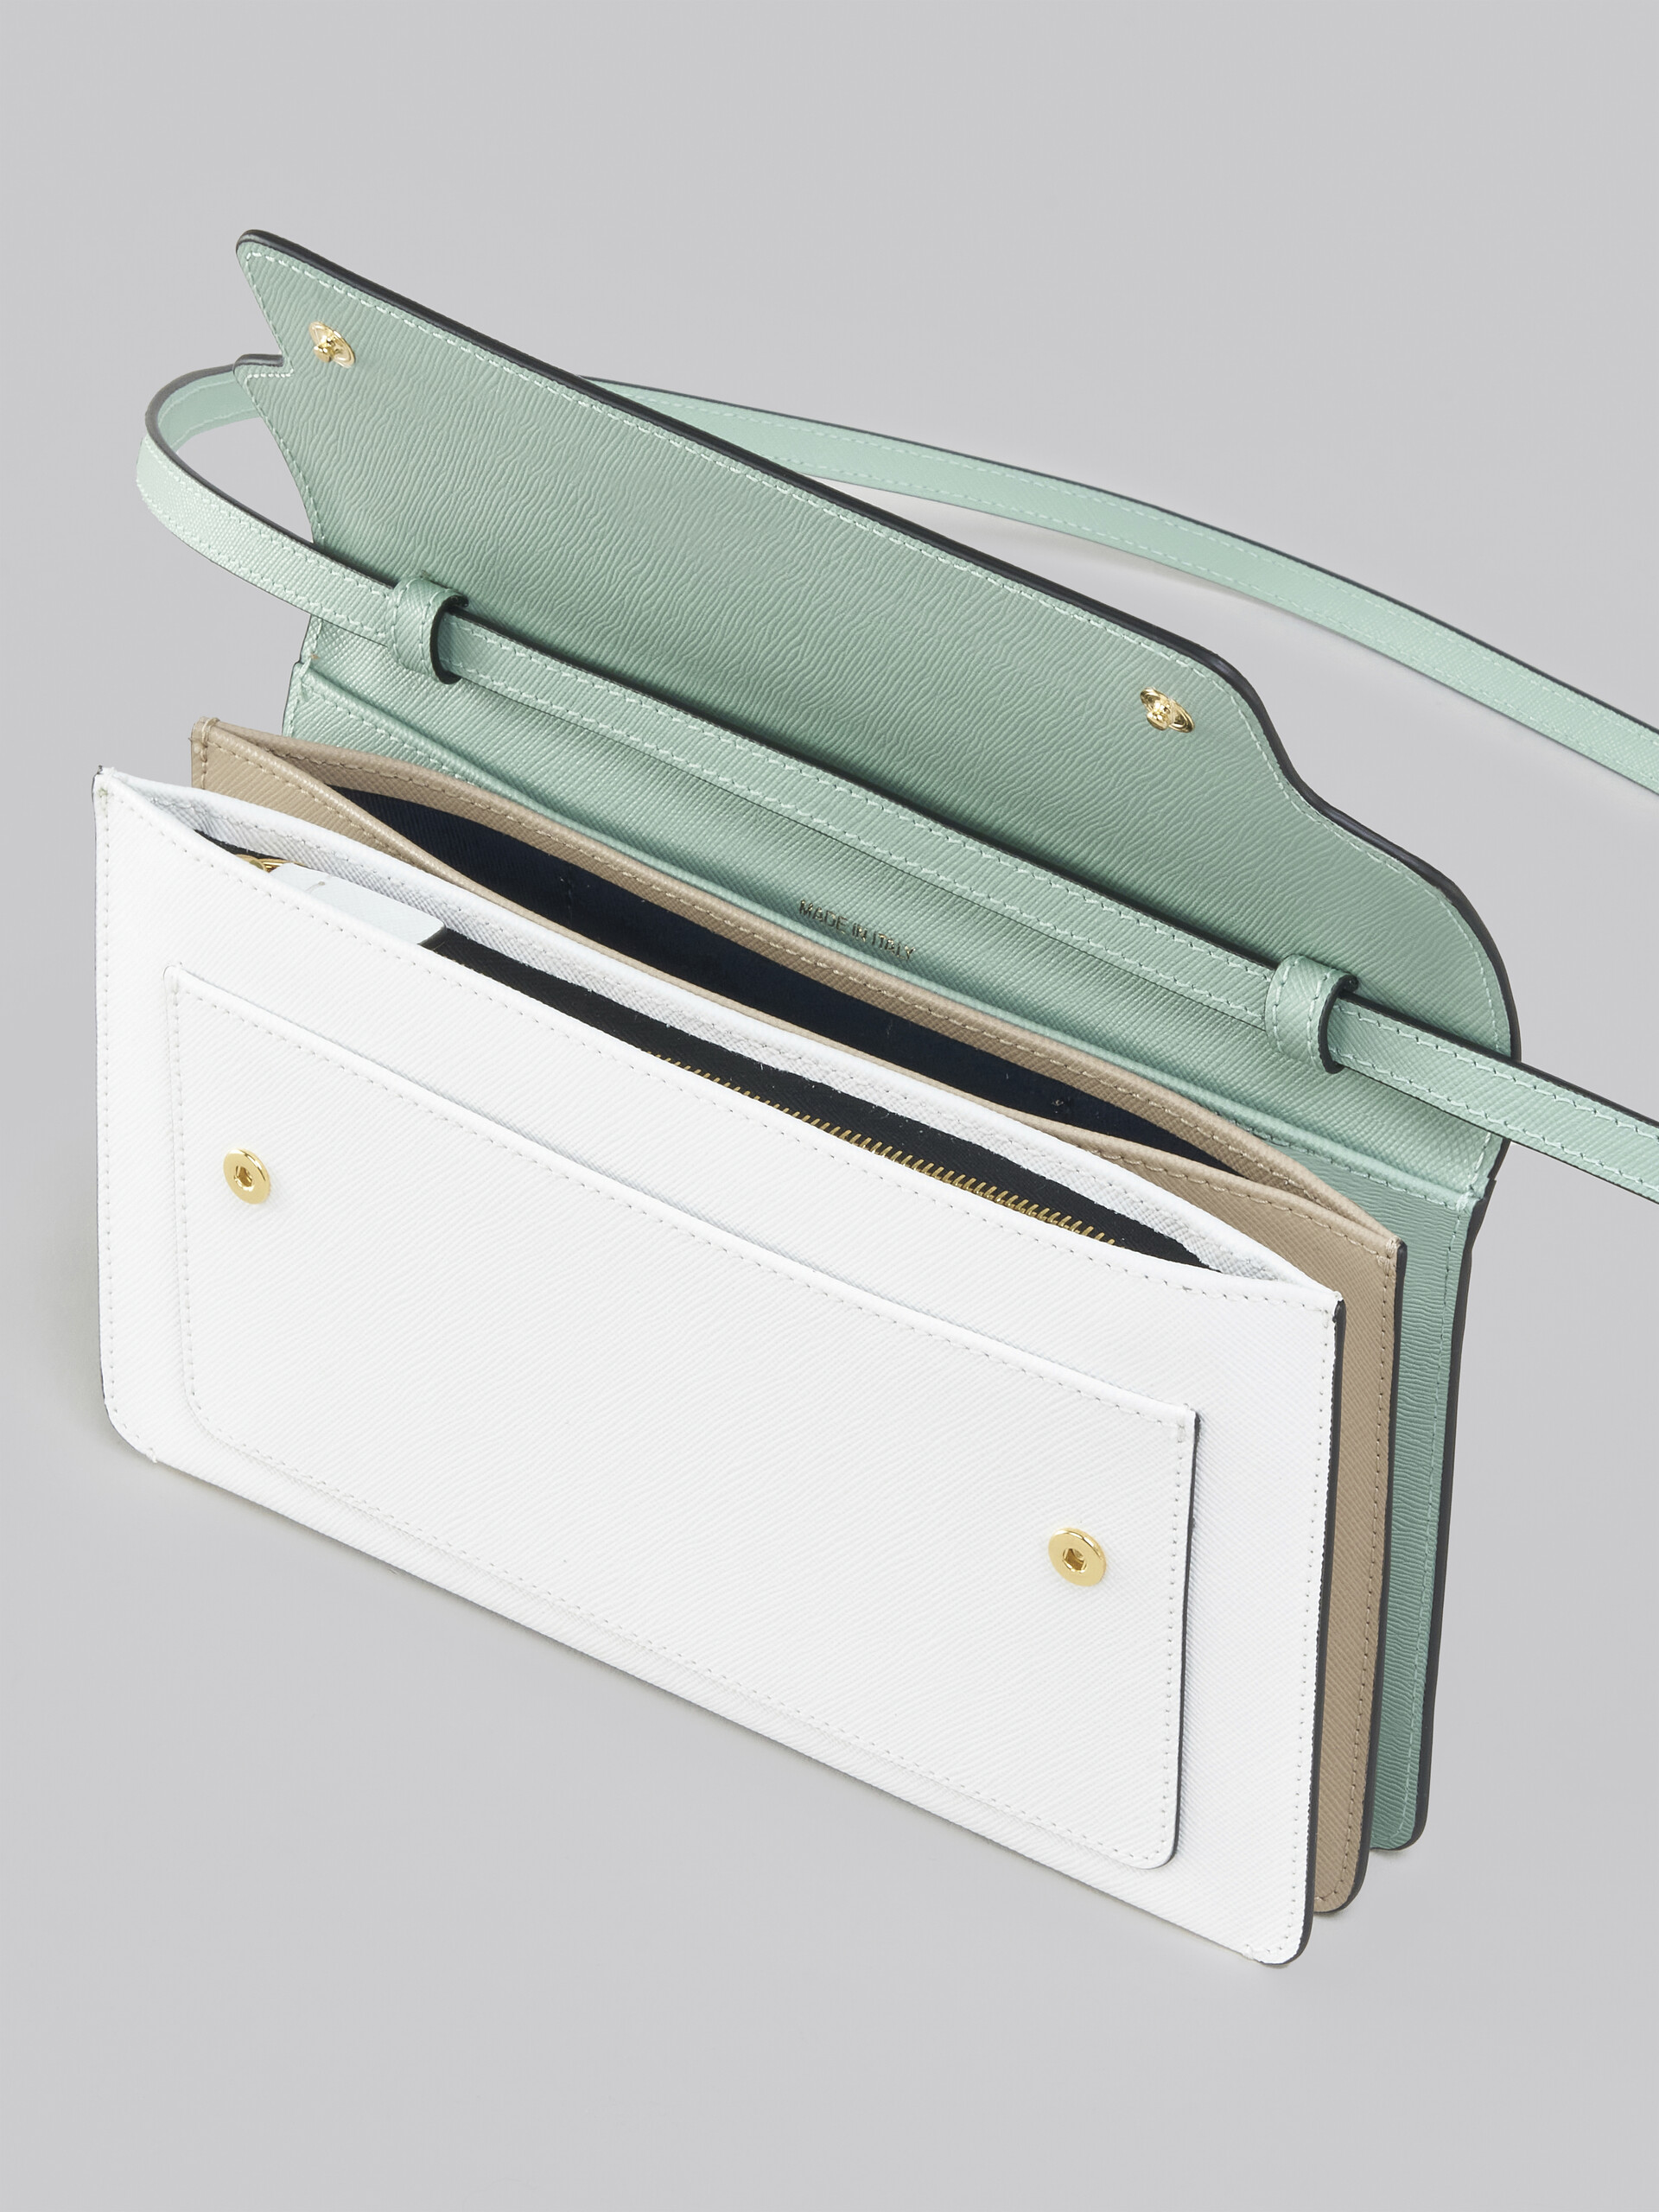 Trunk Clutch in light green white and brown saffiano leather - Pochettes - Image 5